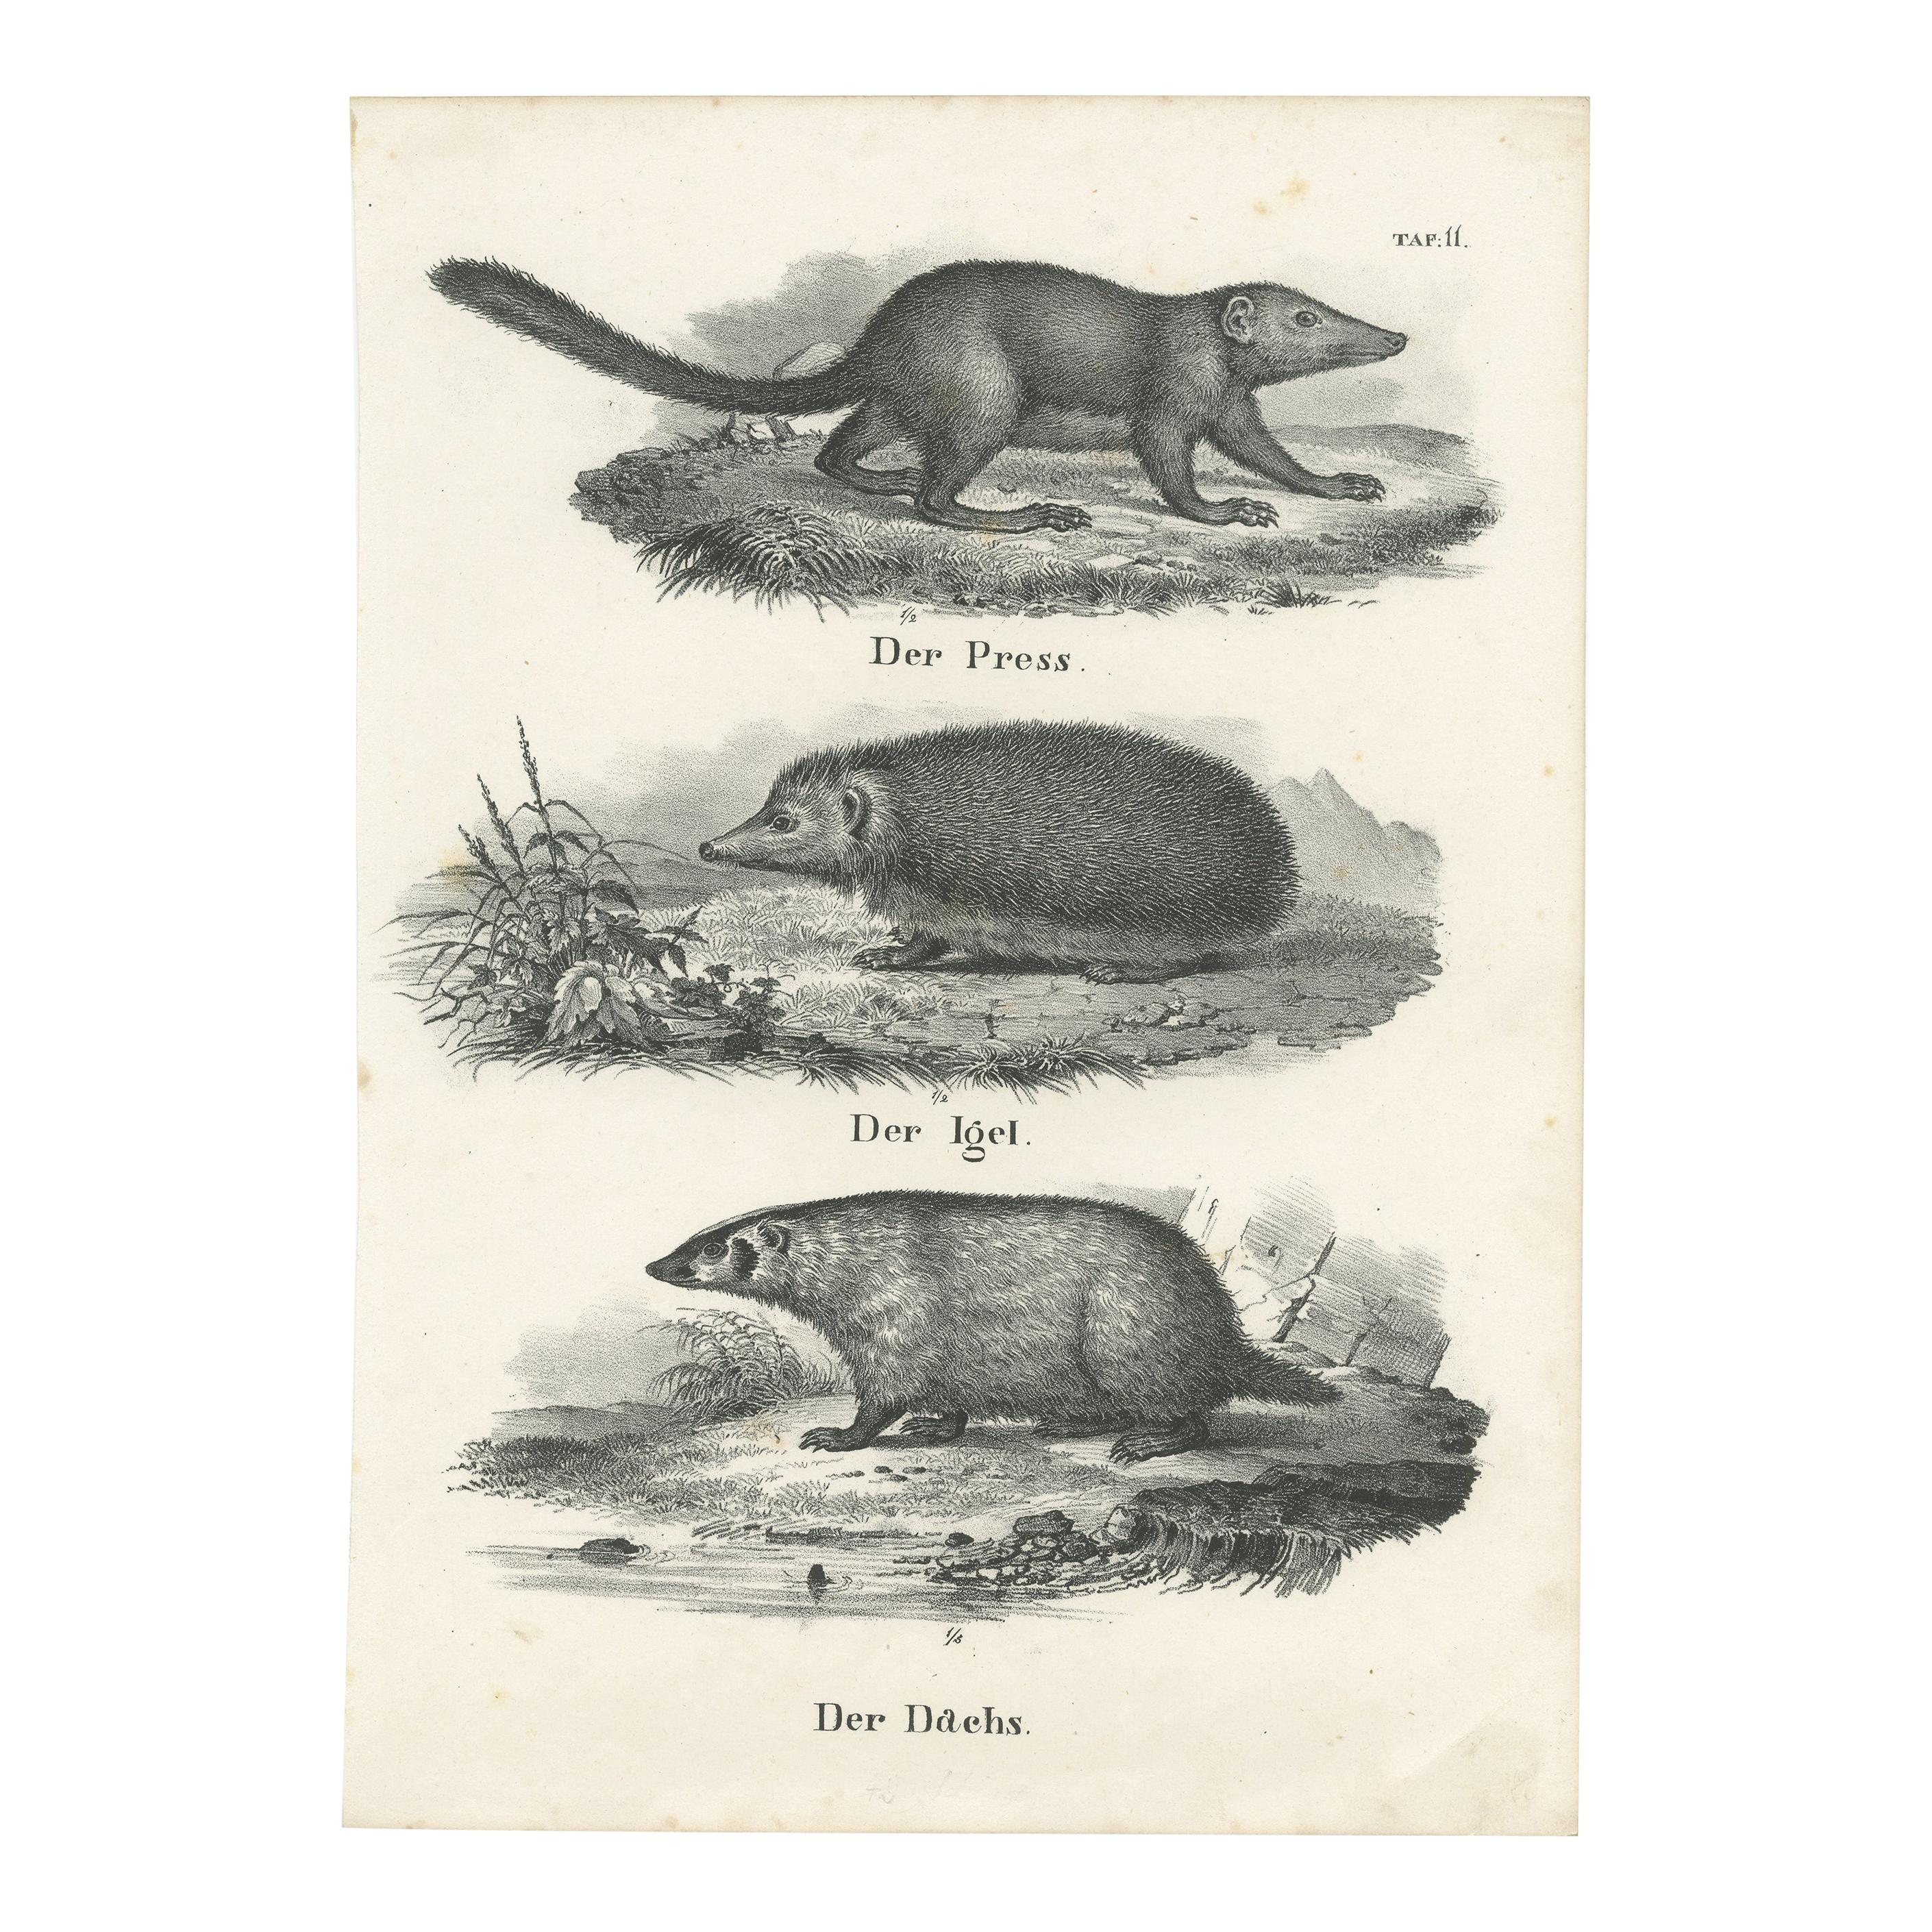 Antique Print of Rodents Including a Hedgehog and Badger by Schinz, '1845'